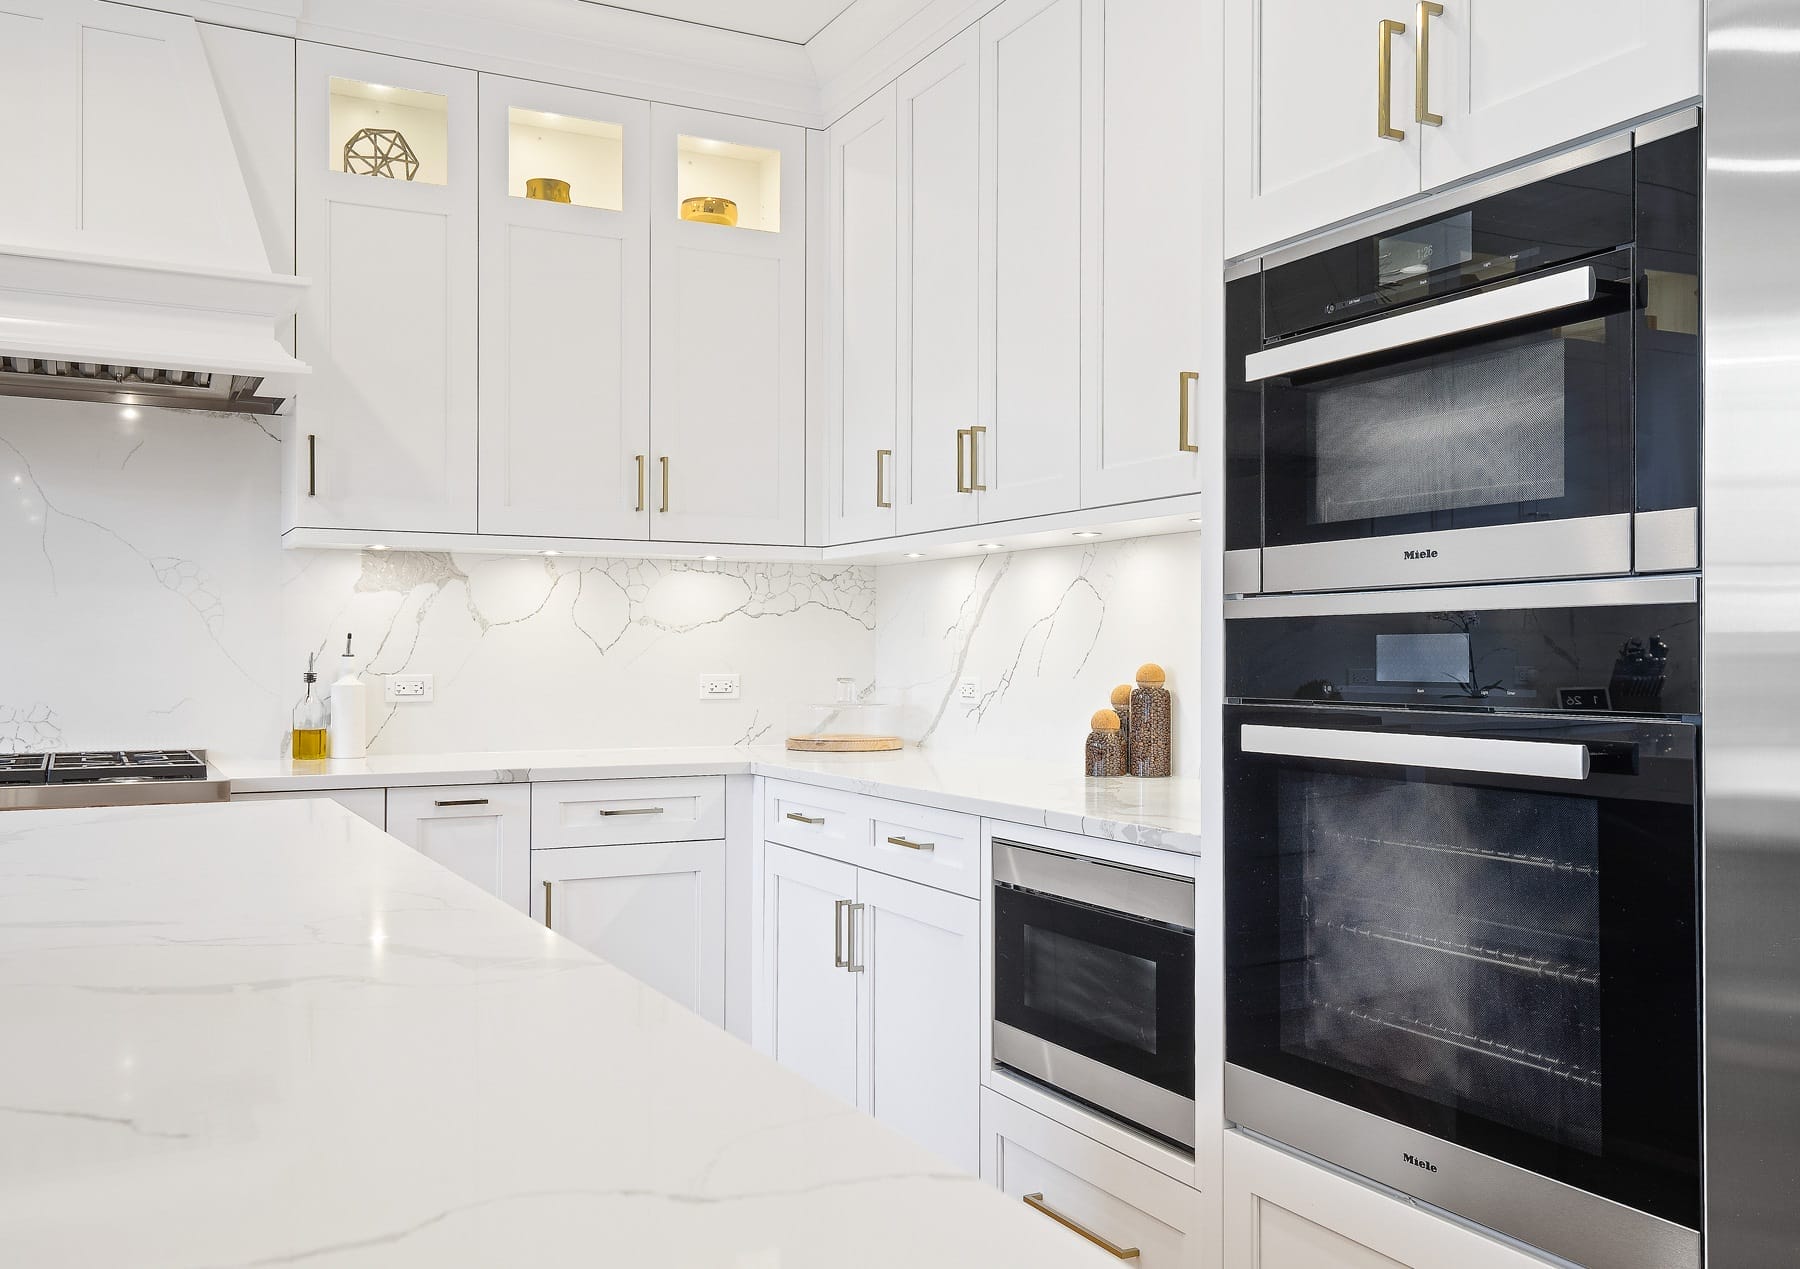 Built-In Appliances with Under Cabinet Lighting